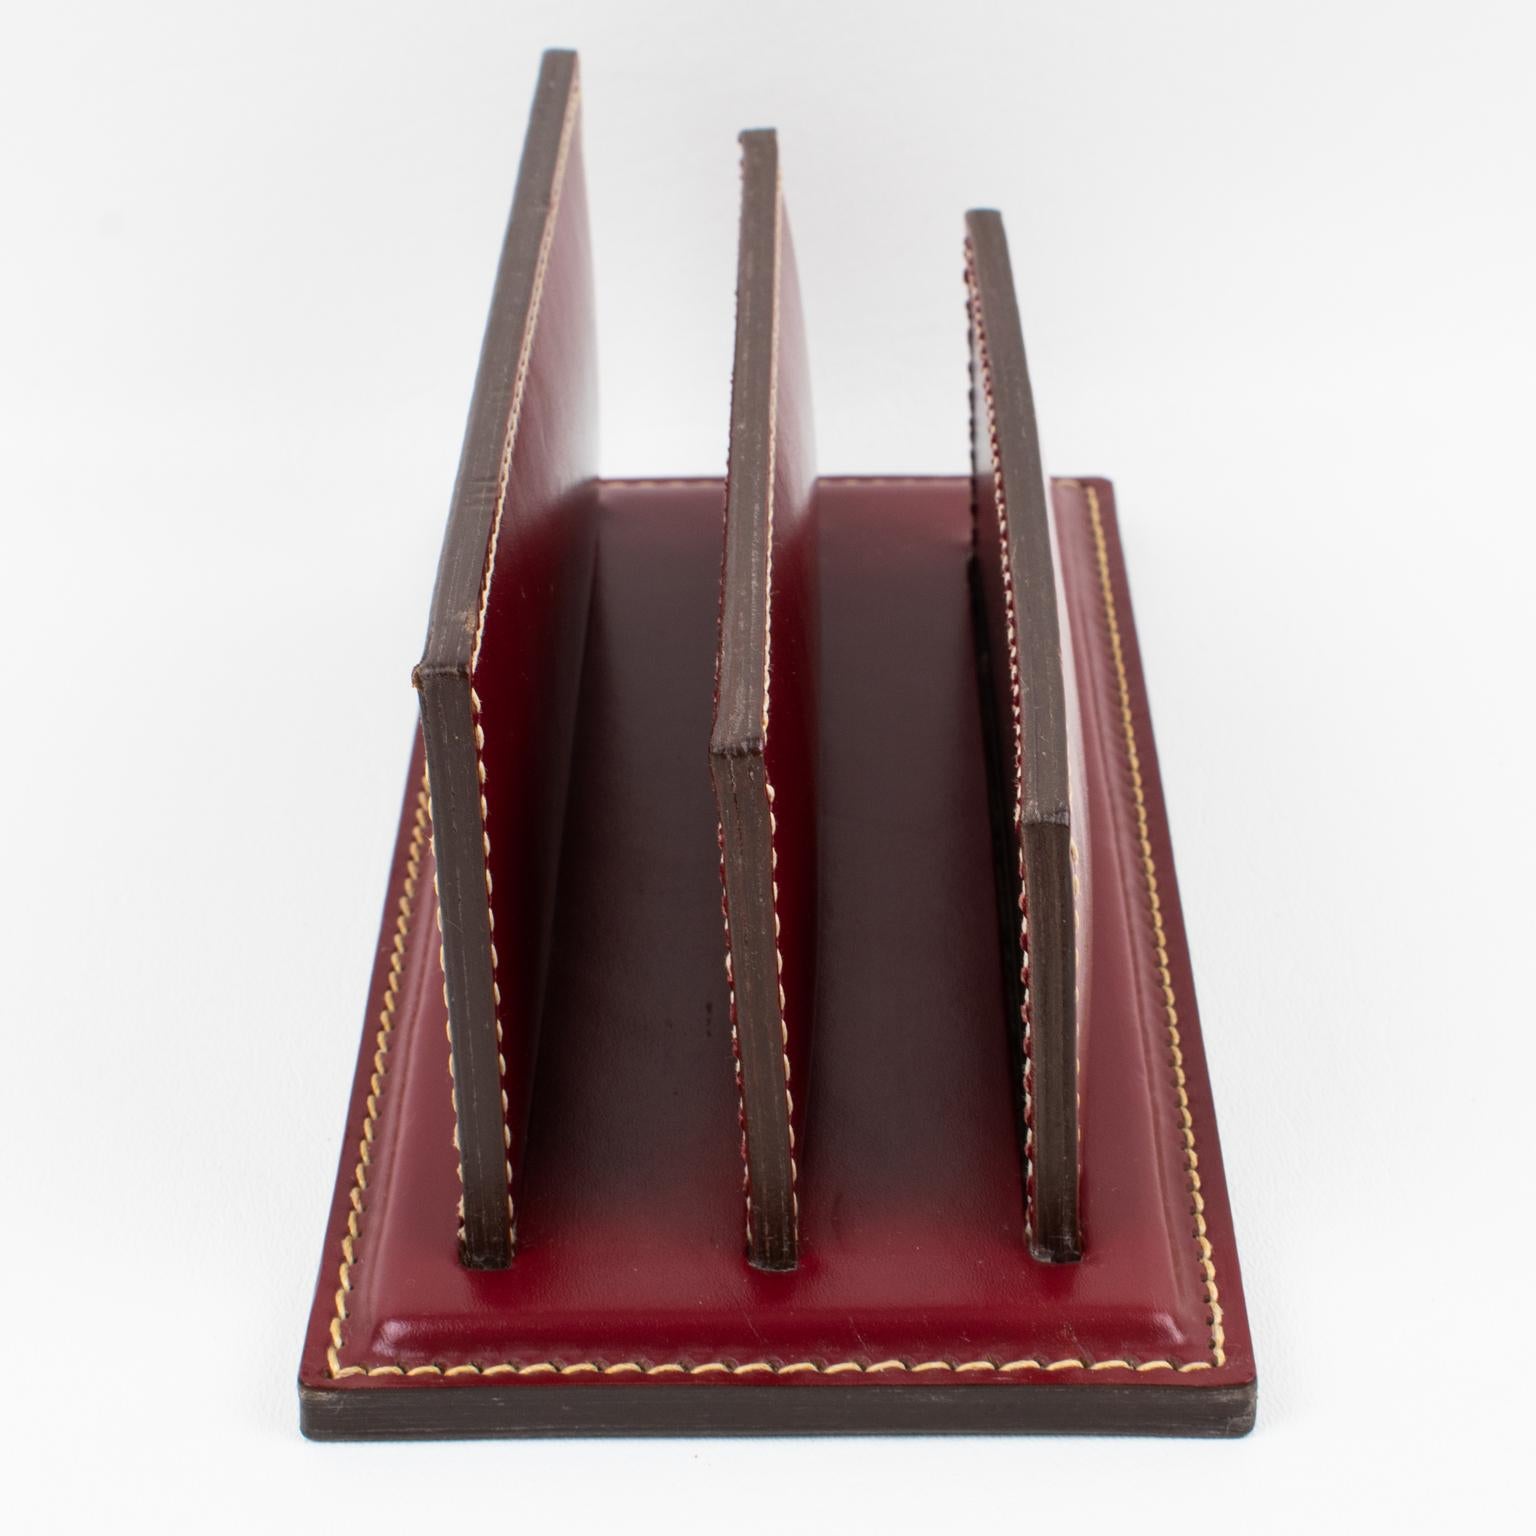 Art Deco Hand-Stitched Red Leather Desk Set Letter and Pen Holders For Sale 5